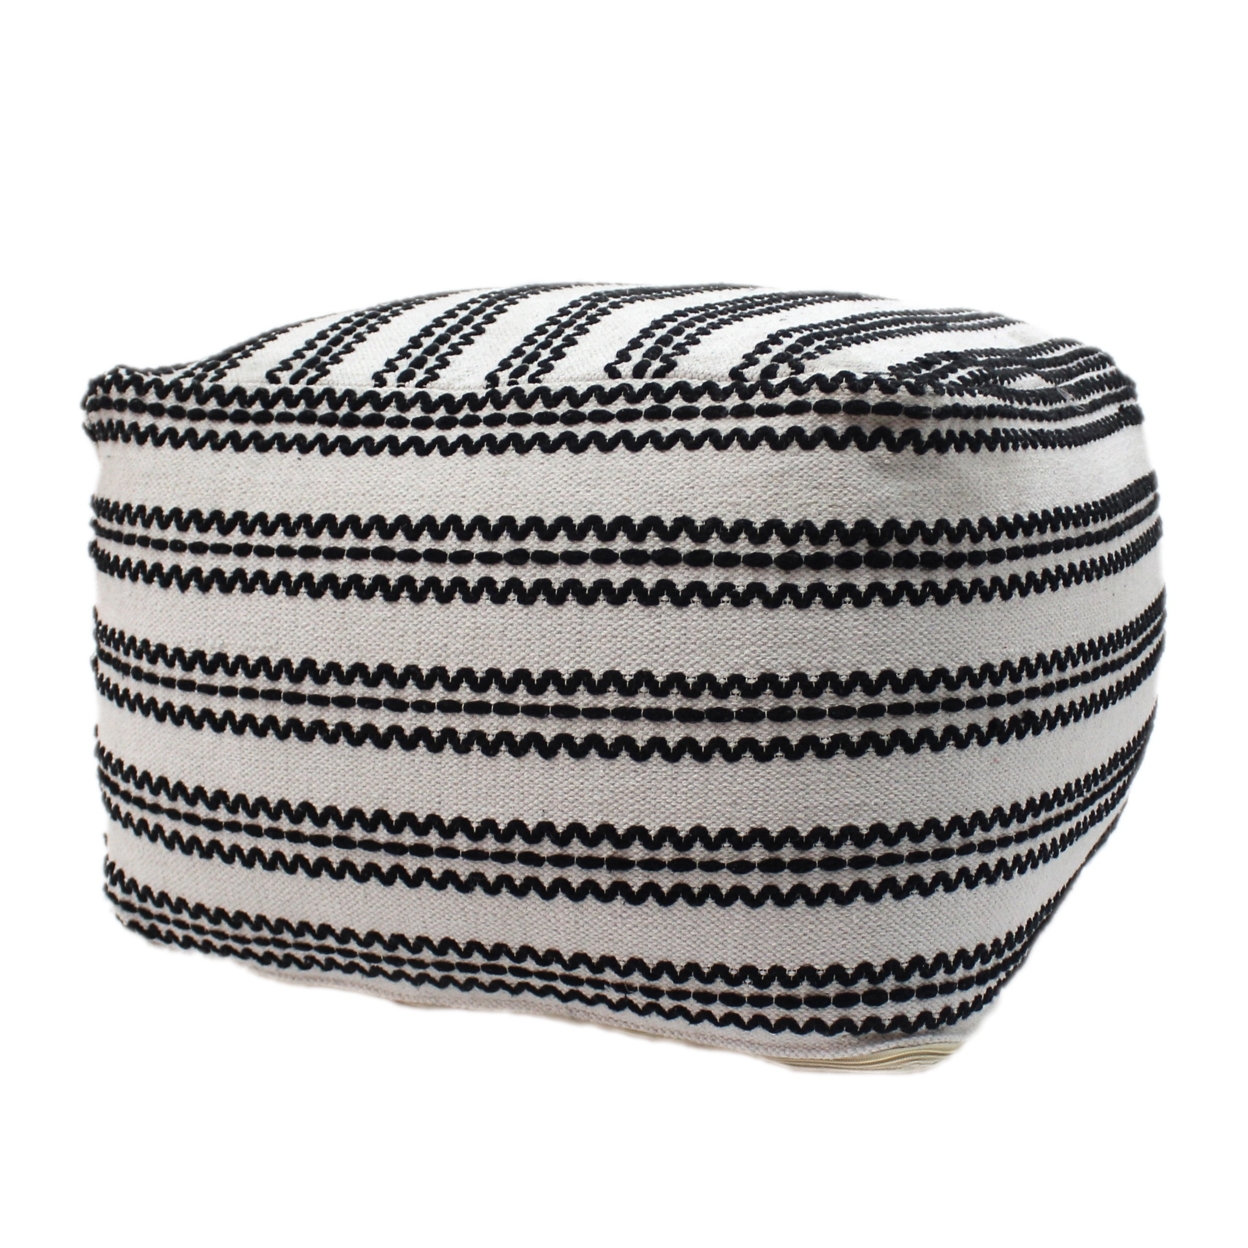 Lillian Large Square Casual Pouf, Contemporary, Black And Natural Cotton